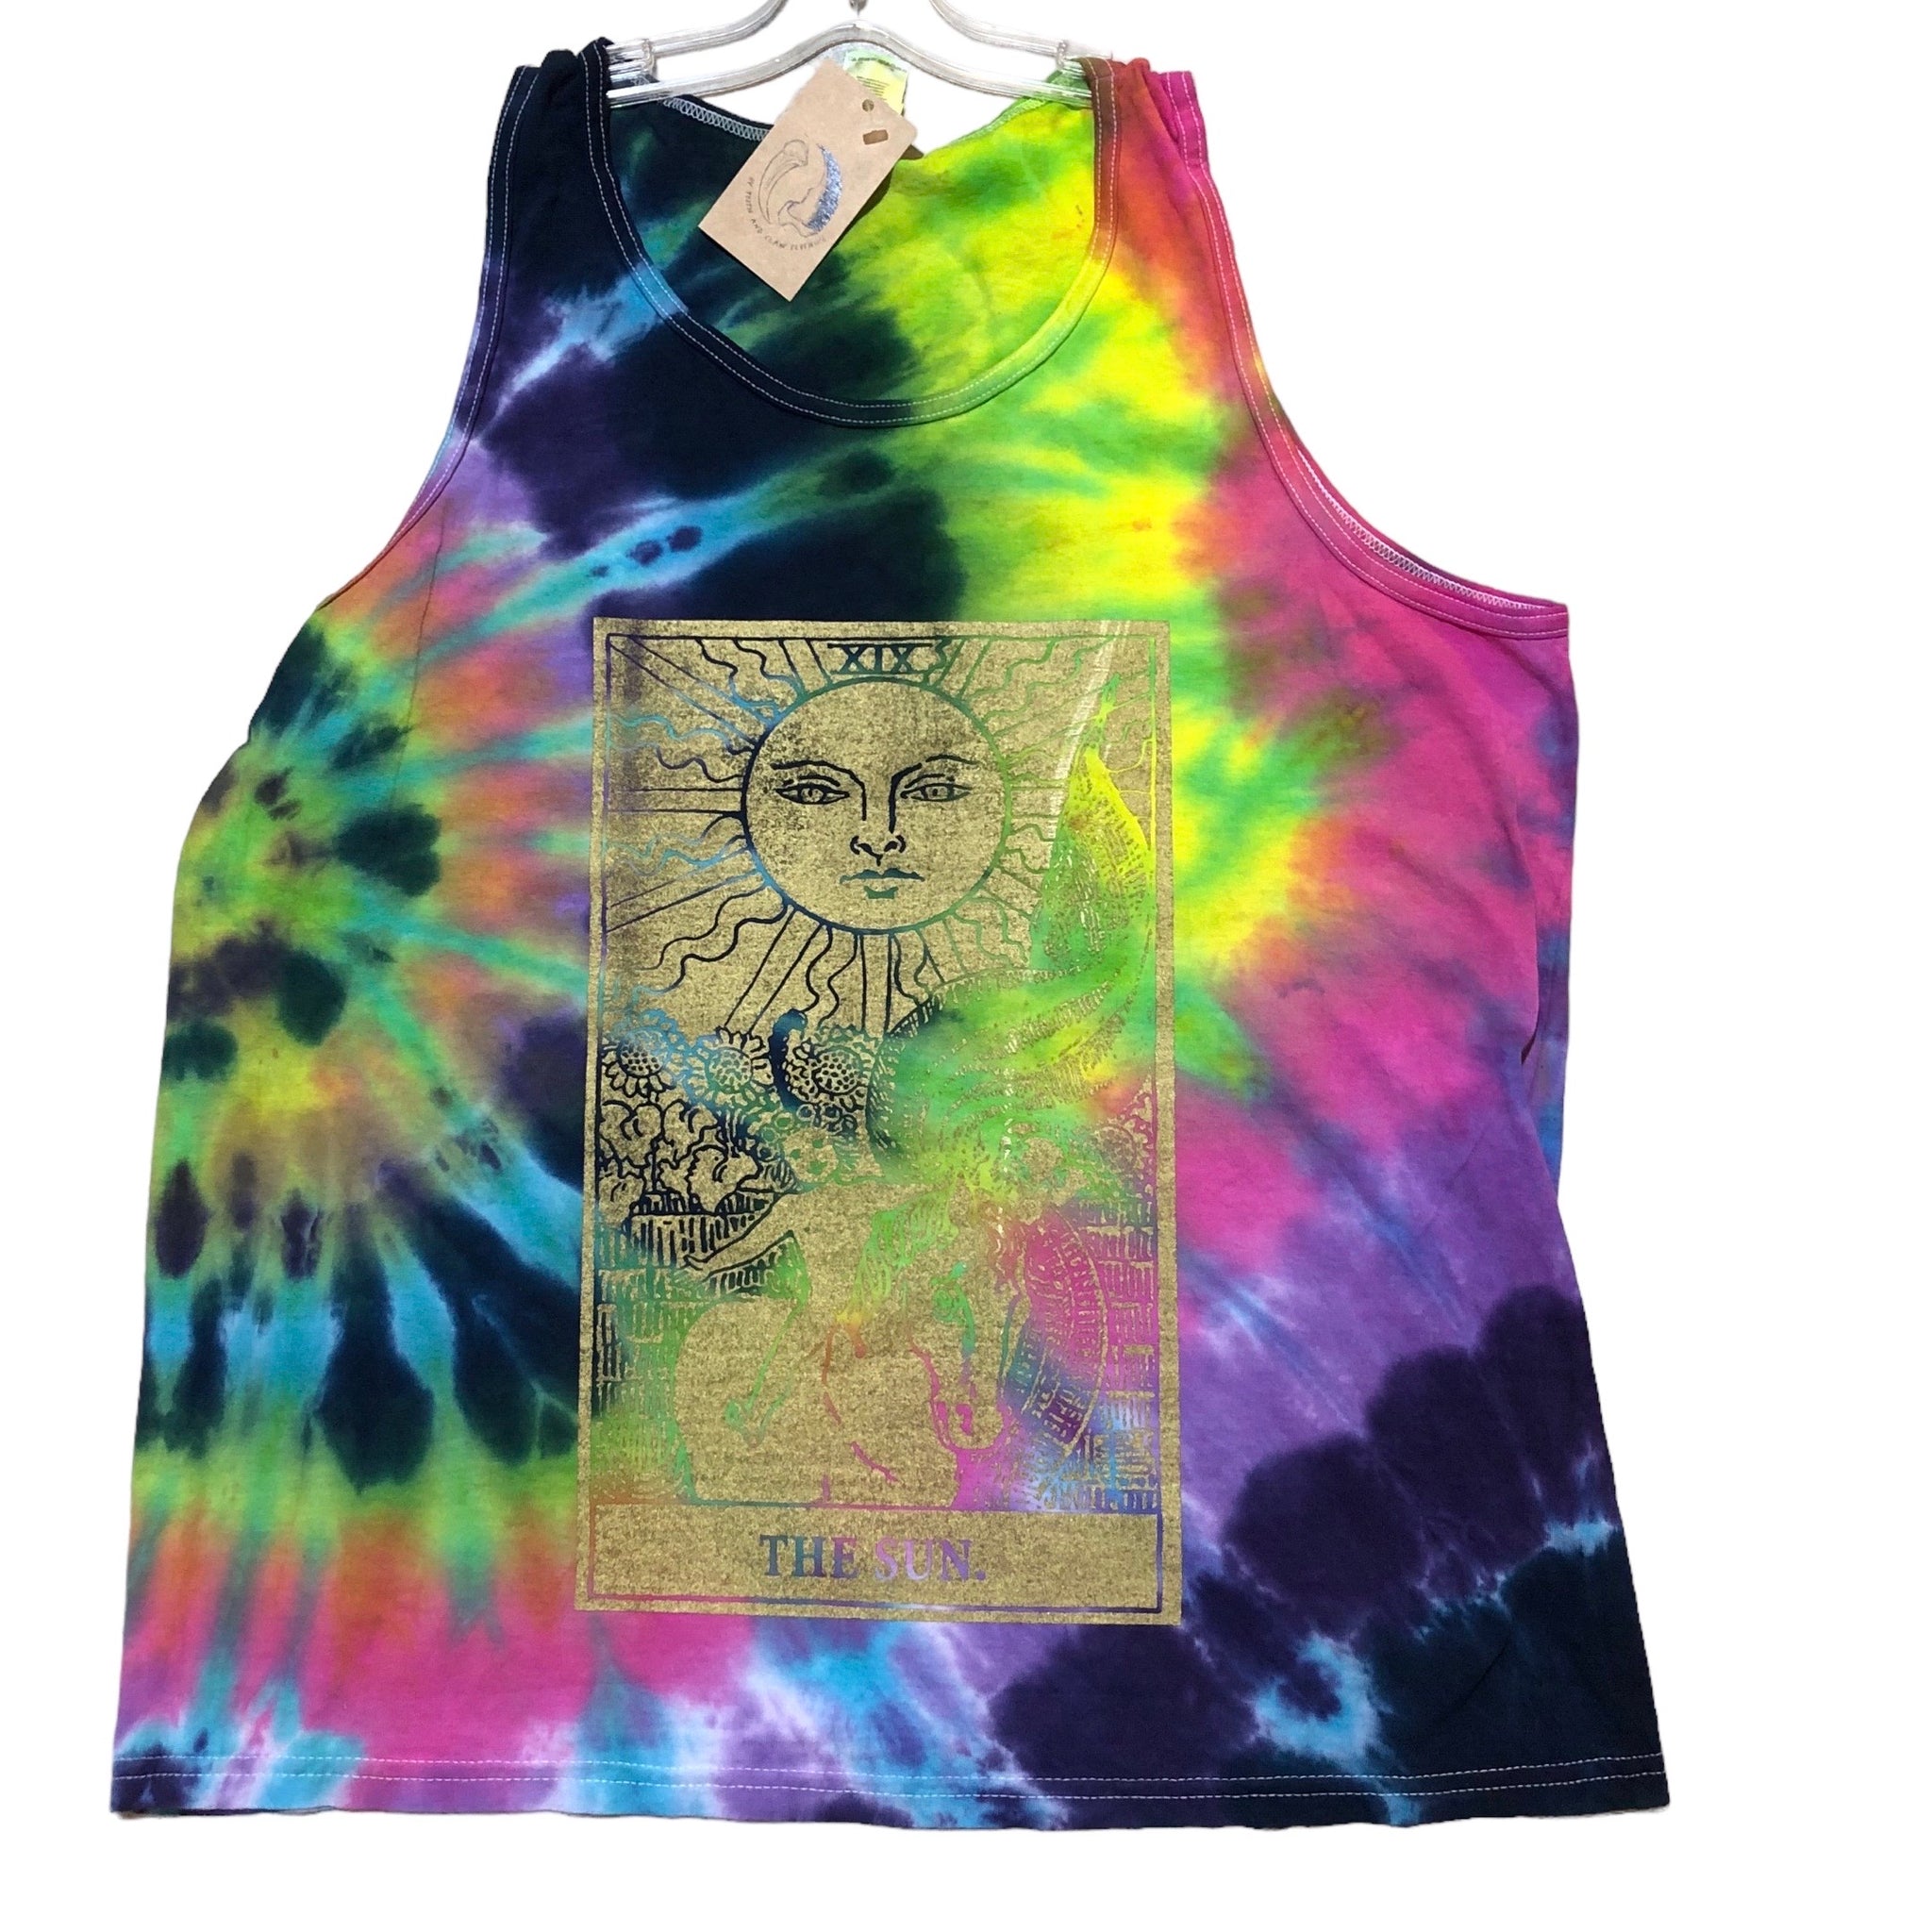 By Tooth and Claw for Blim “Neon Rainbow Tie Dye Tank Gold Sun”